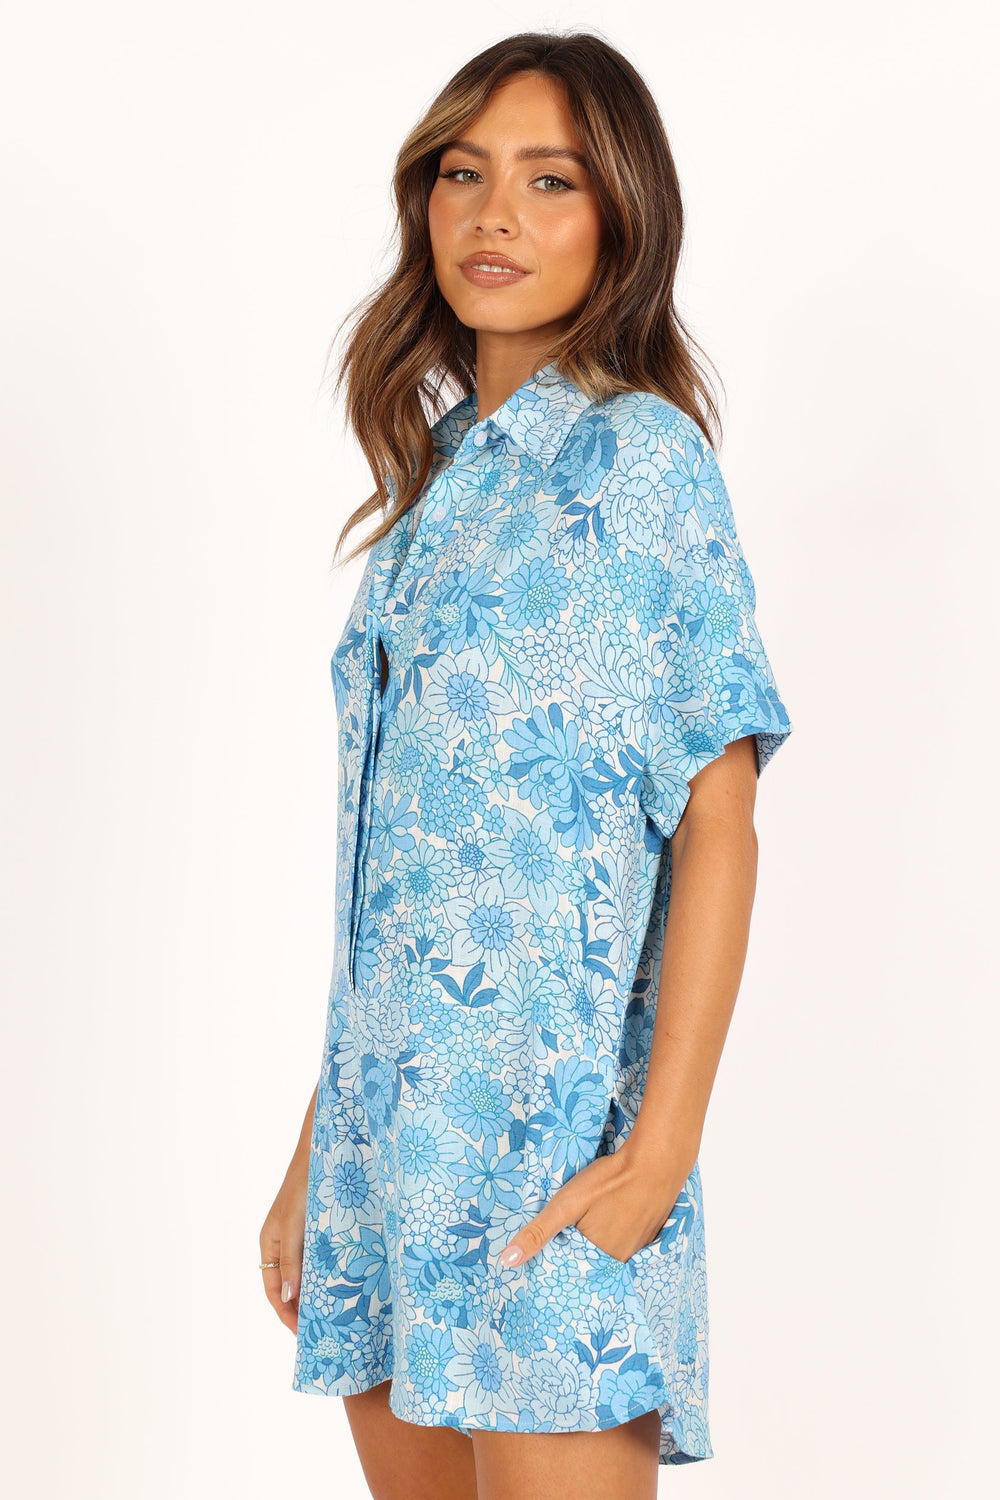 Petal and Pup USA Rompers Emily Button Through Romper - Blue Floral